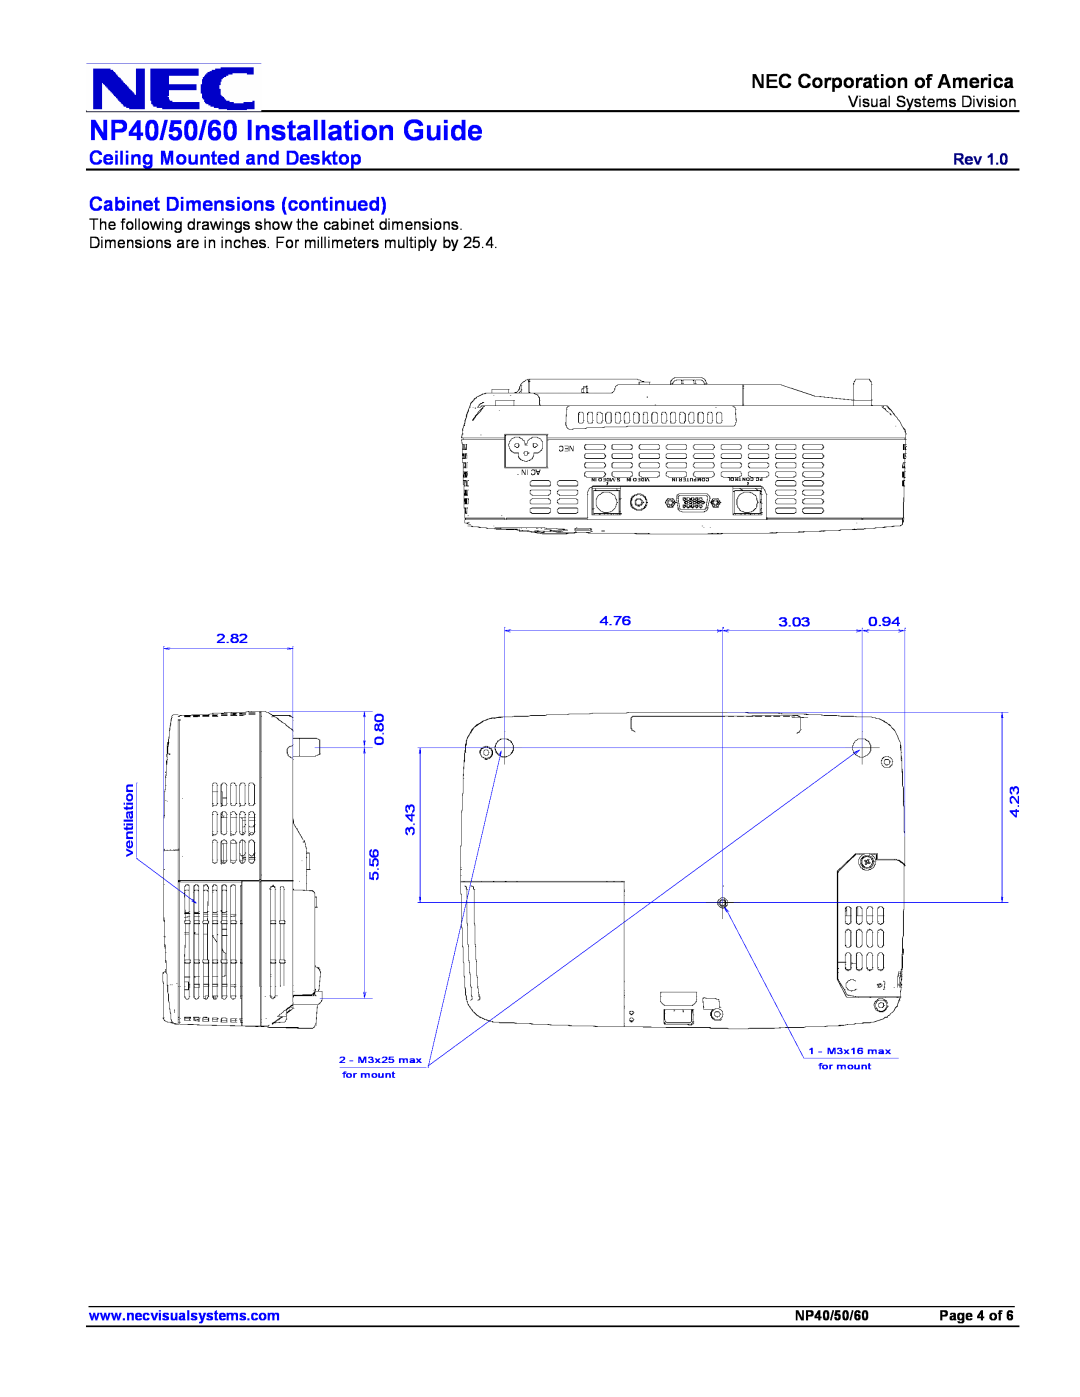 NEC NP50 Cabinet Dimensions continued, NP40/50/60 Installation Guide, NEC Corporation of America, 0.80, ventilation, 5.56 